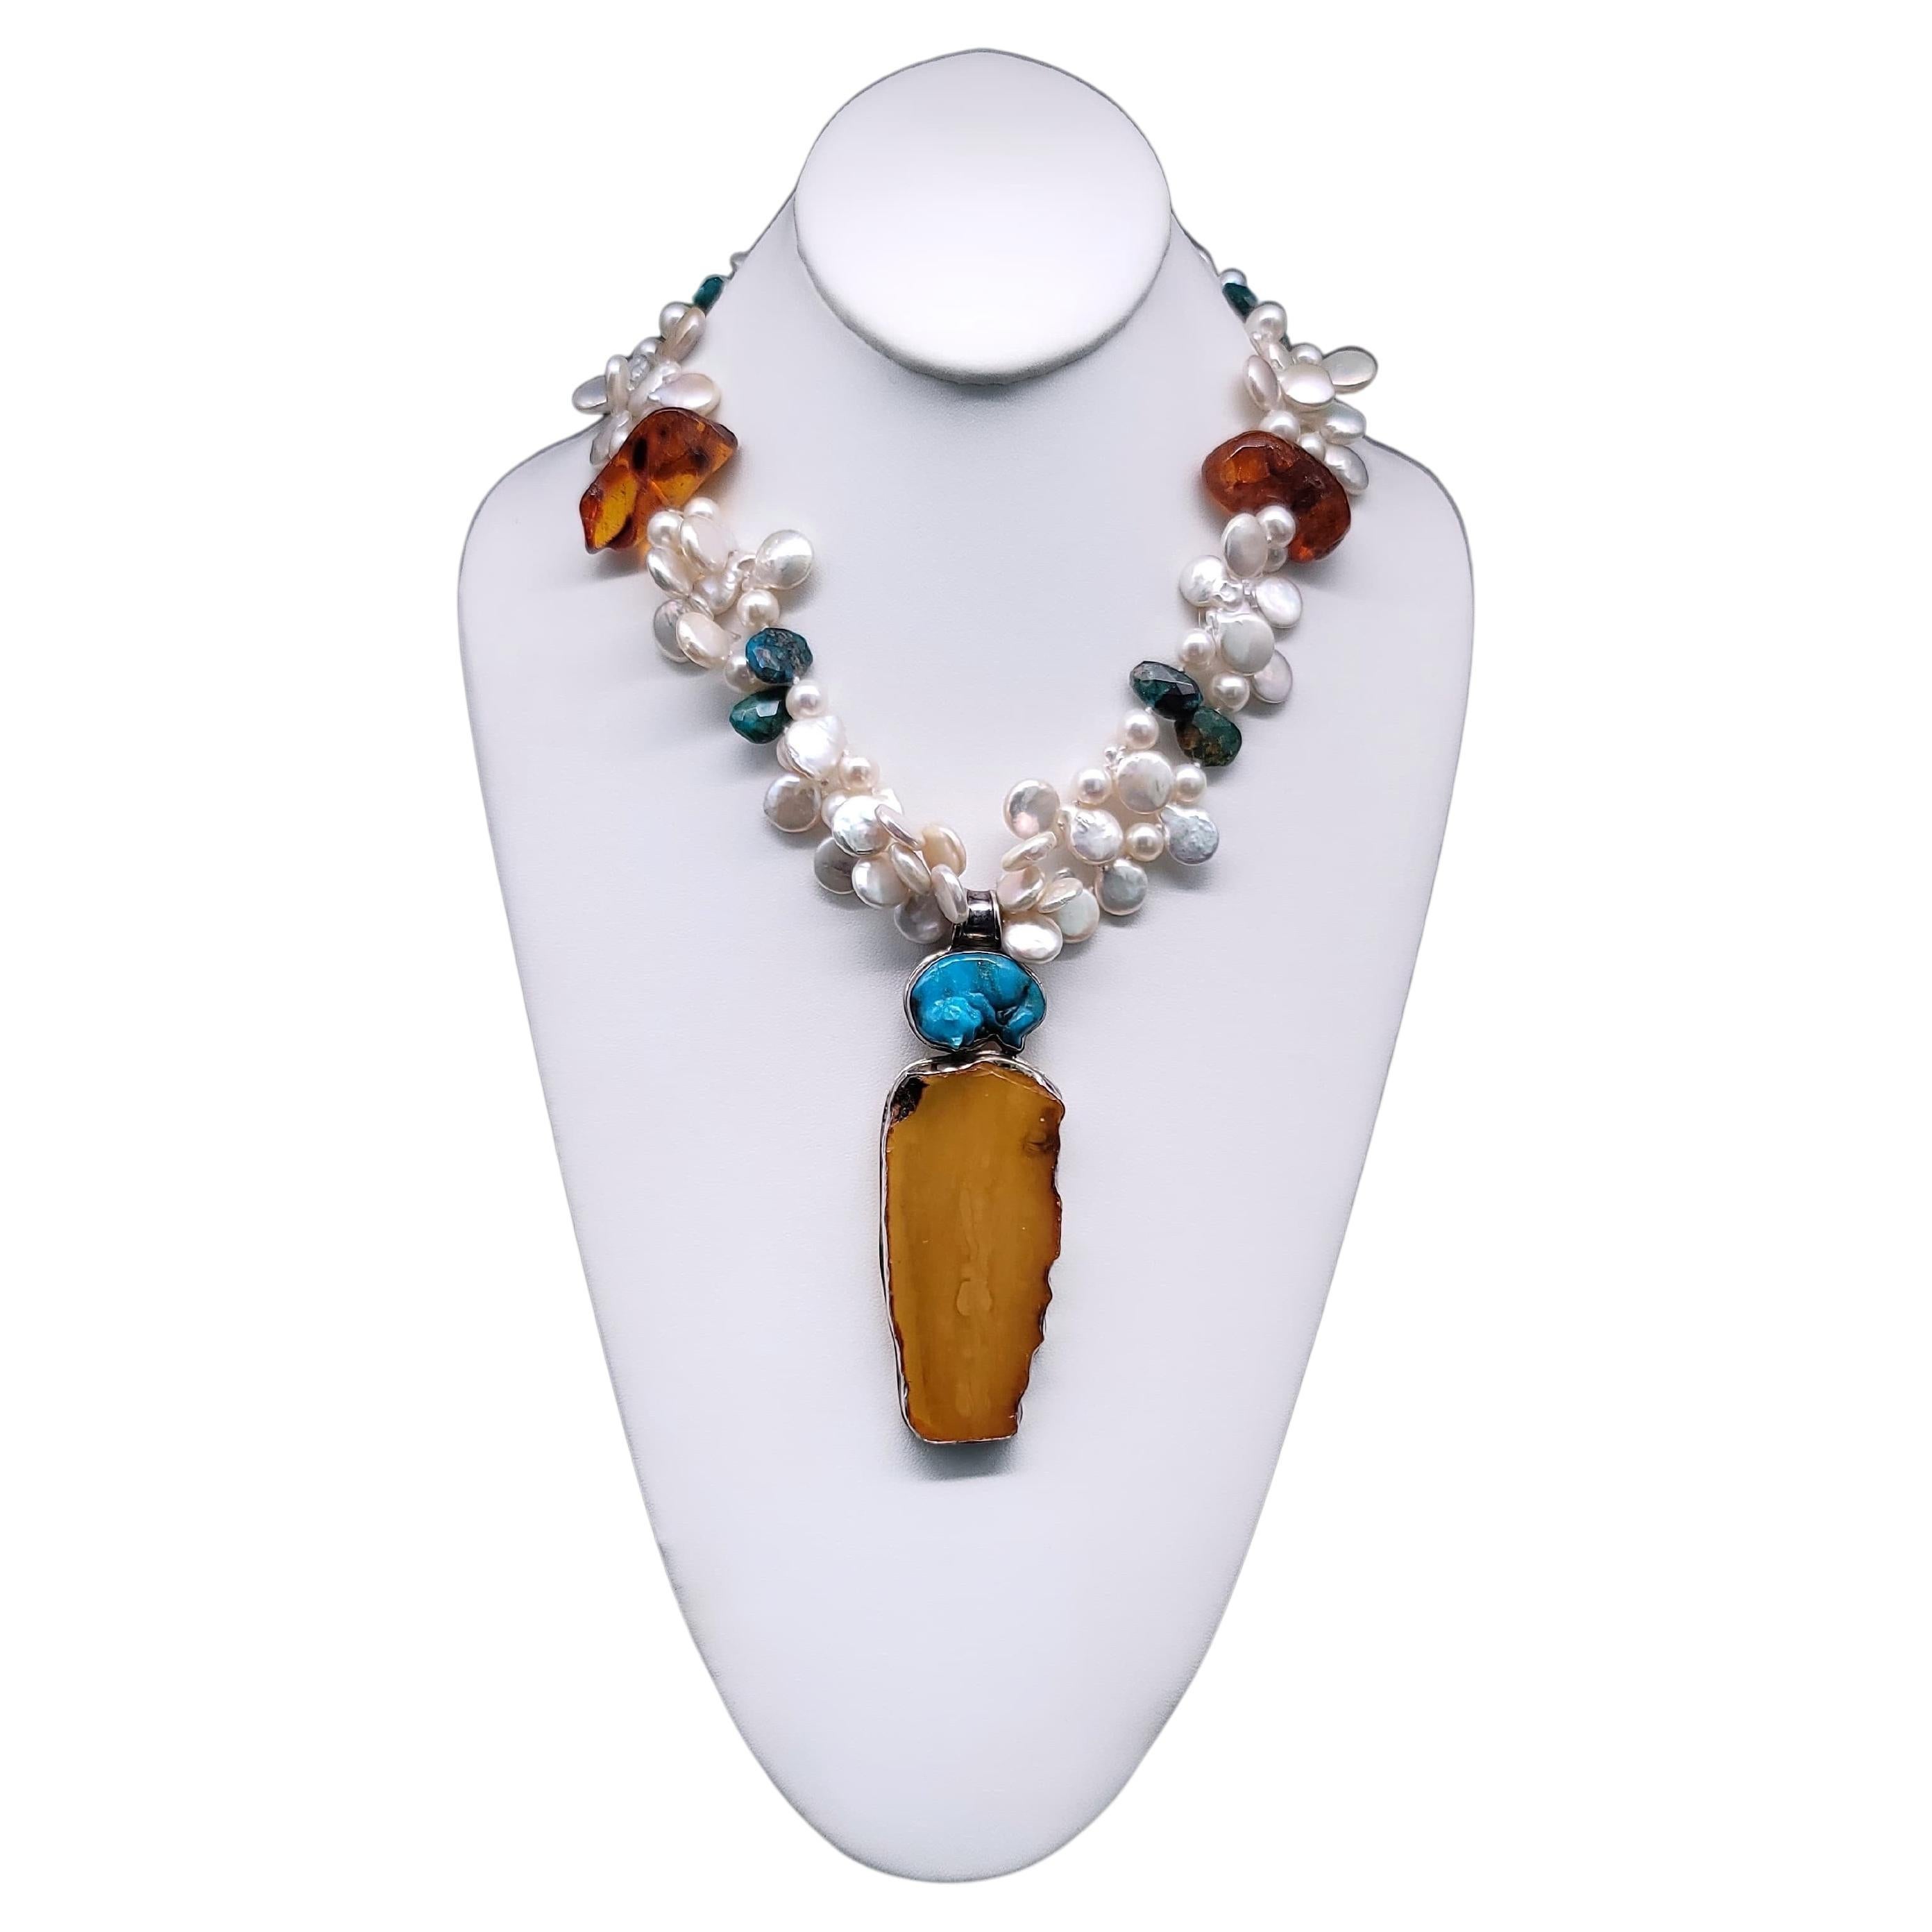 A.Jeschel Pearl necklace with spectacular Amber pendant. For Sale